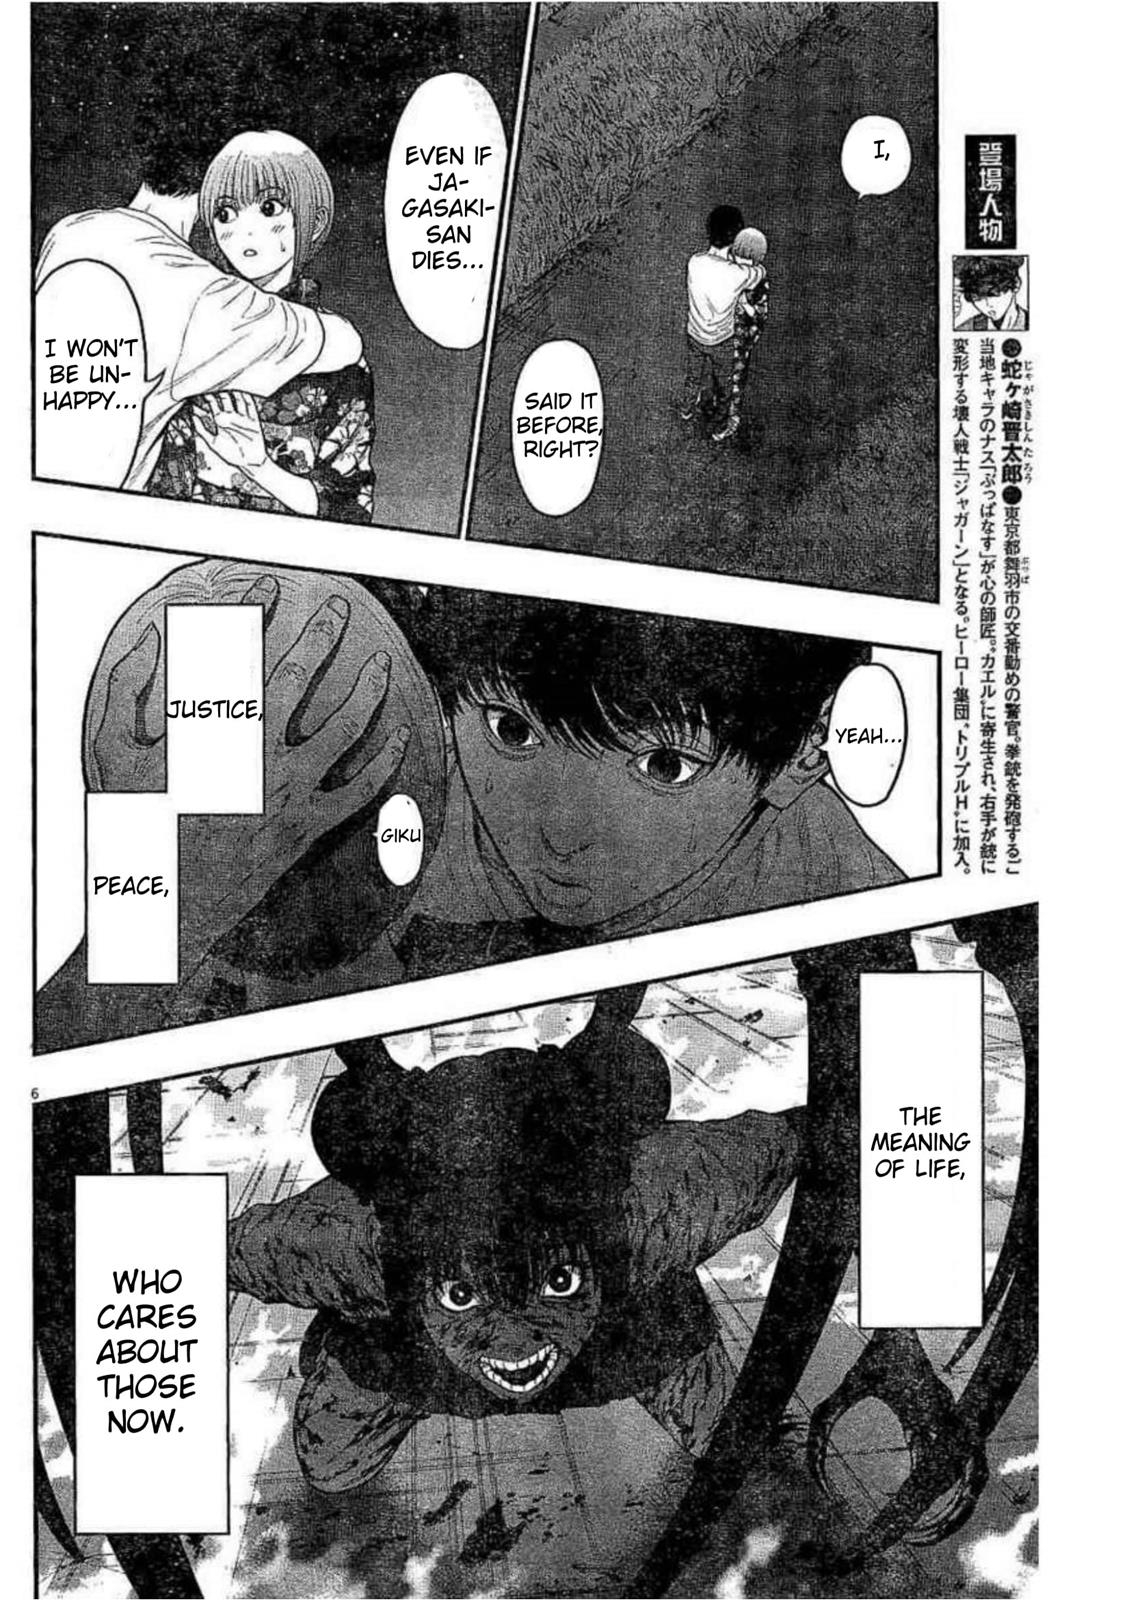  Chapter 30 image 007